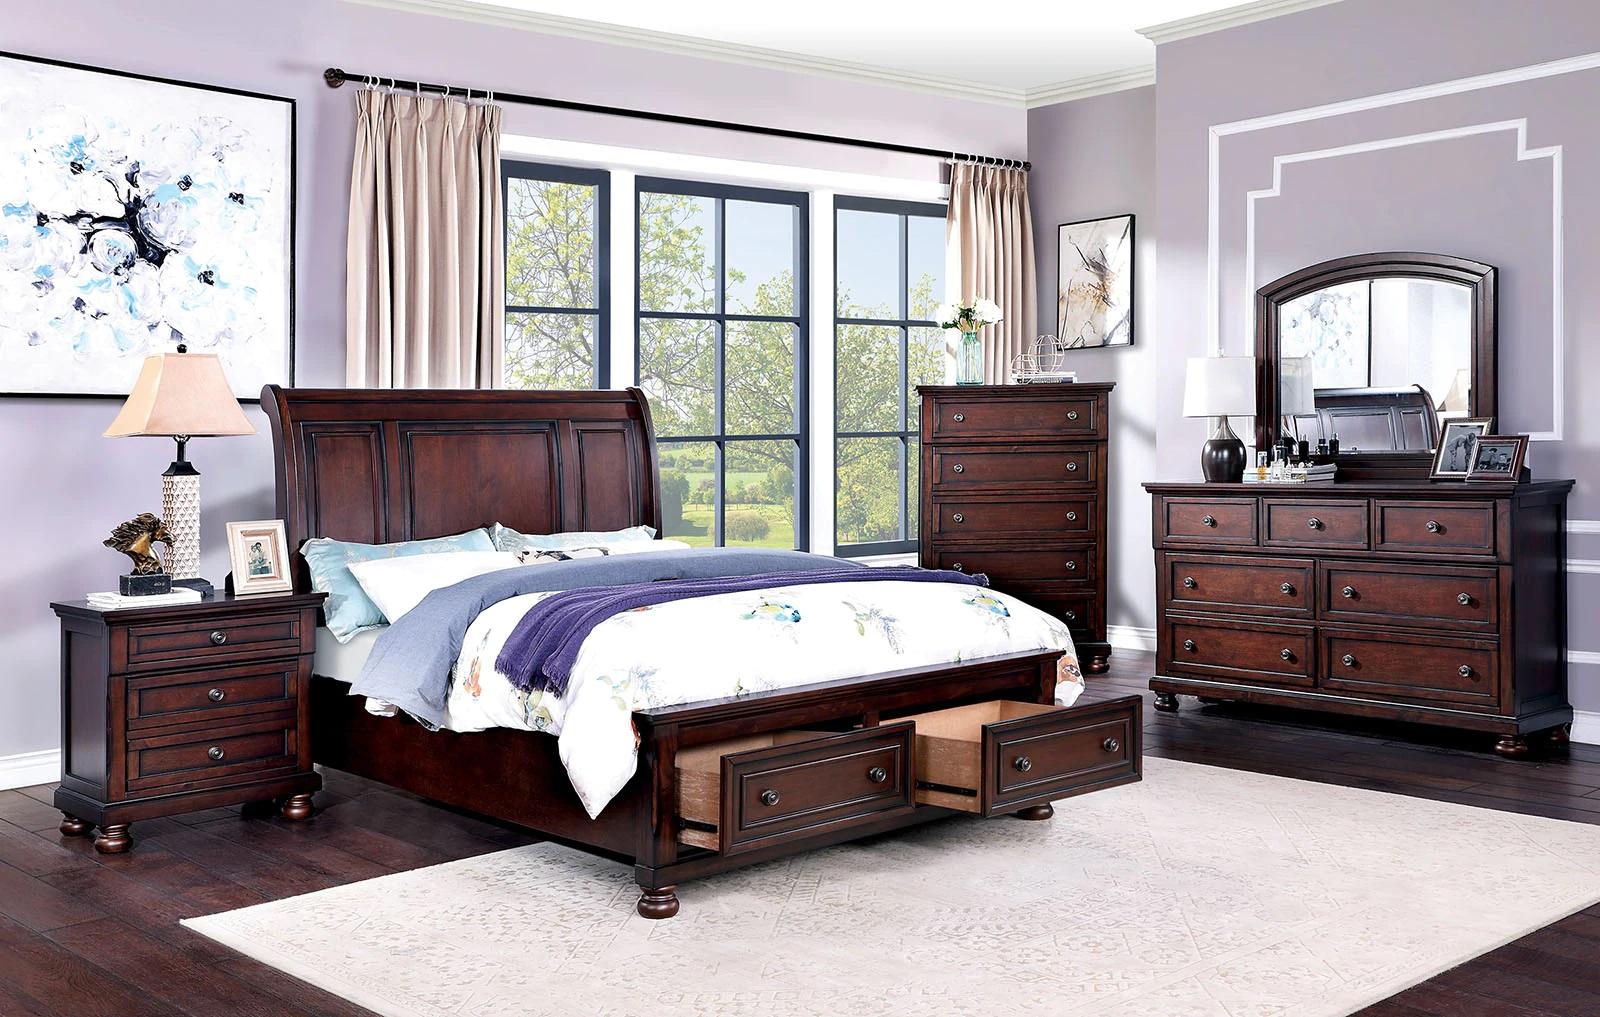 

    
Transitional Dark Cherry Solid Wood CAL Bedroom Set 5pcs Furniture of America CM7548CH-DR Wells
